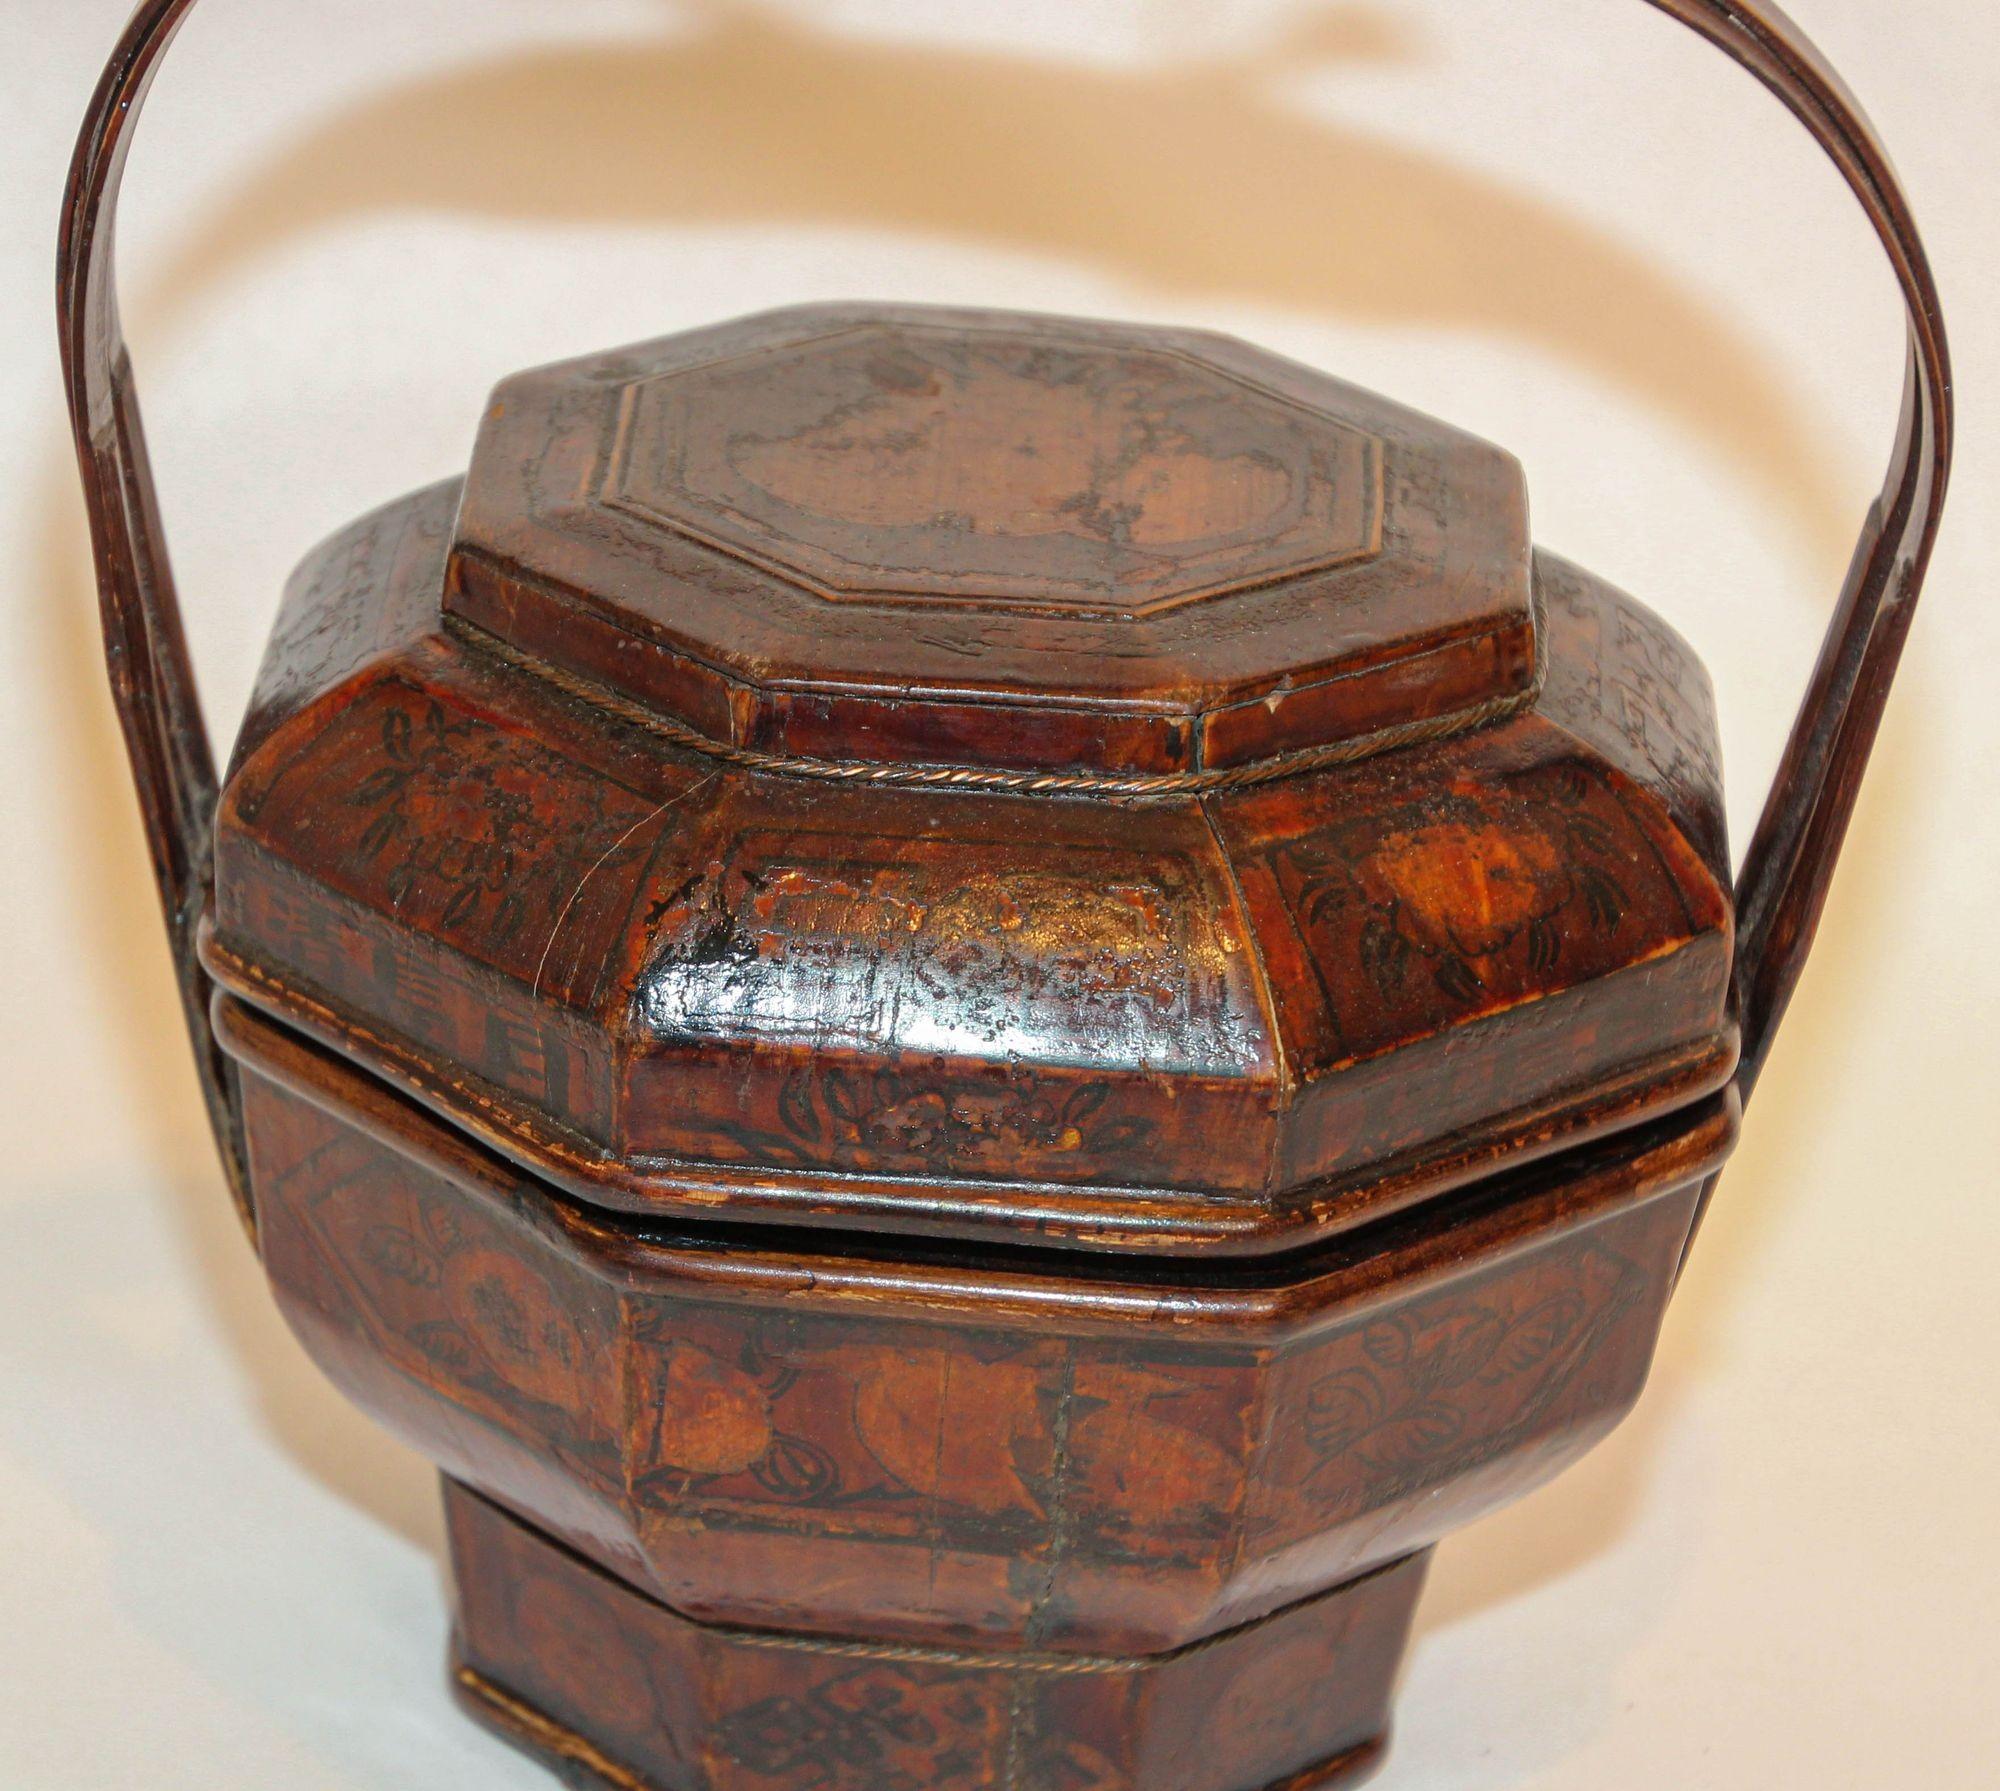 Vintage Chinese wedding red, brown and black lacquer basket hand painted with floral frieze.
Decorative octagonal Chinese basket often known as a wedding basket, created in China during the late Qing Dynasty period in the early years of the 20th